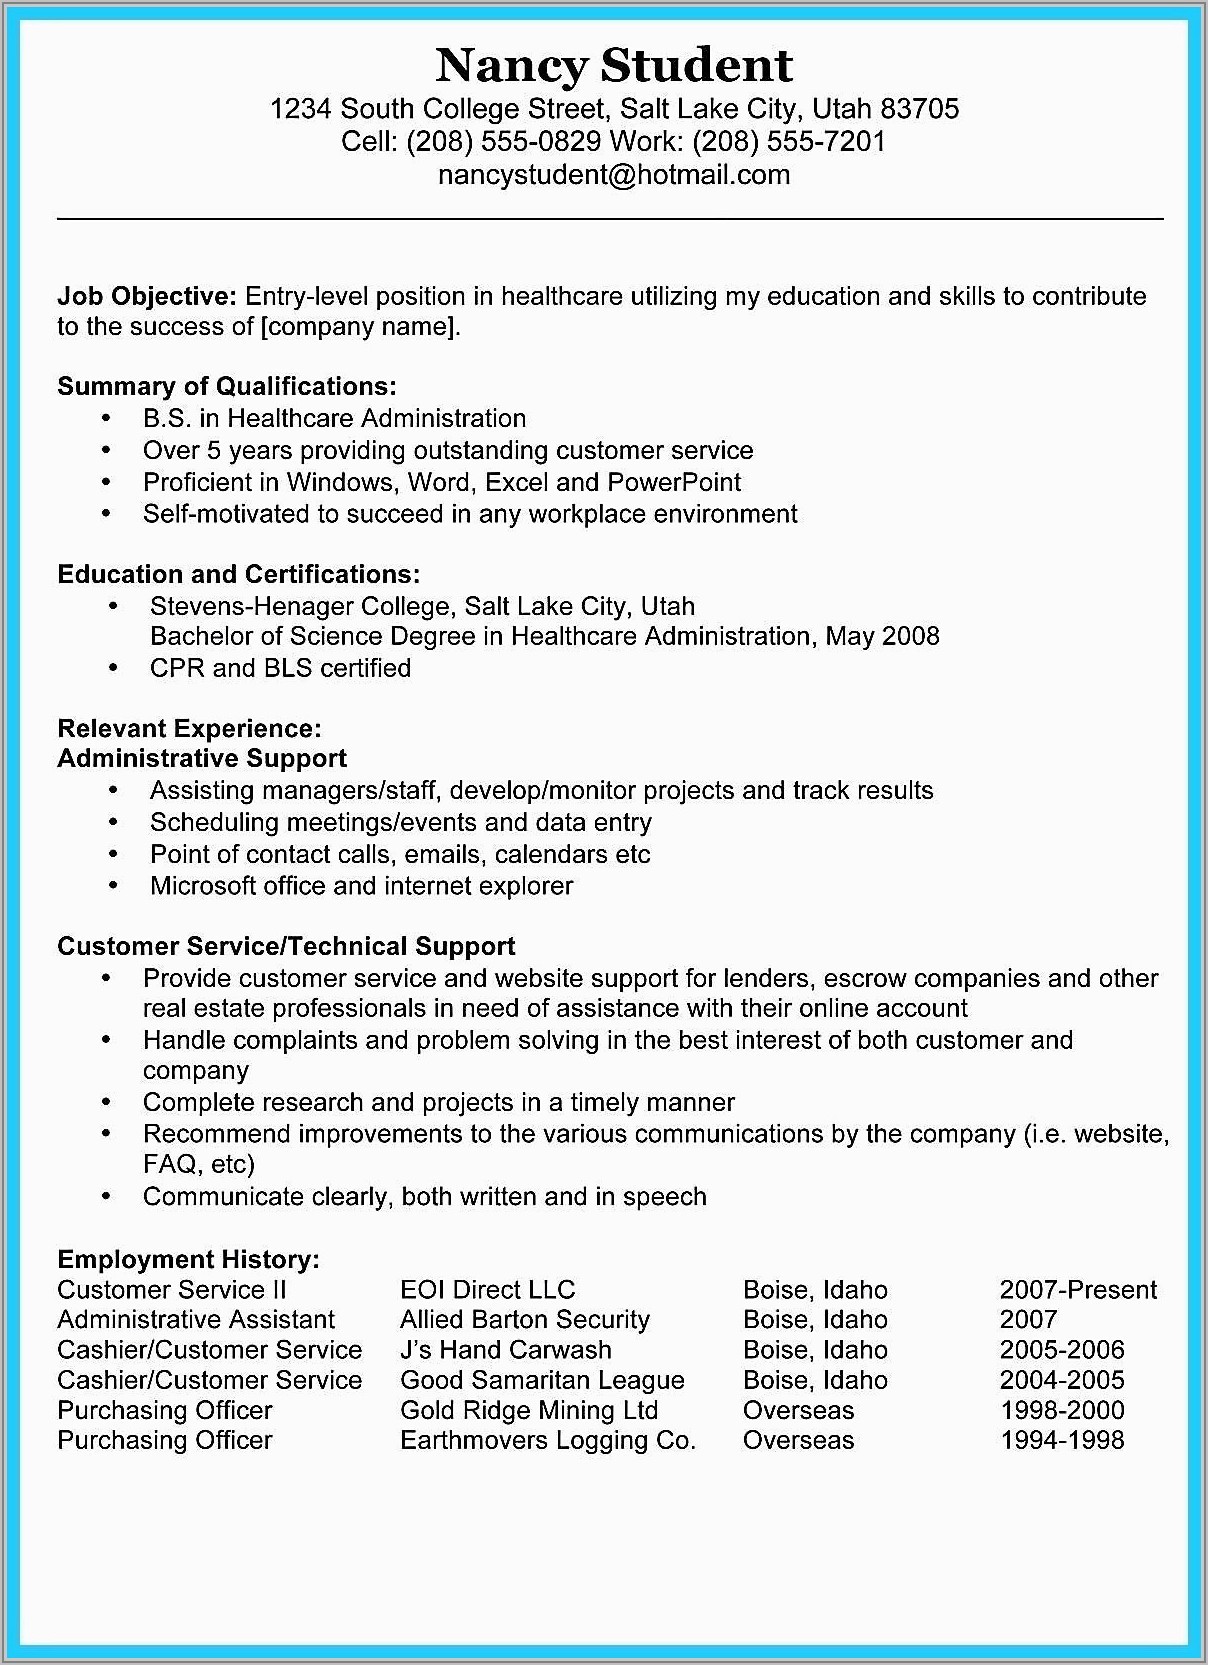 Resume Samples For Account Executive In Sales